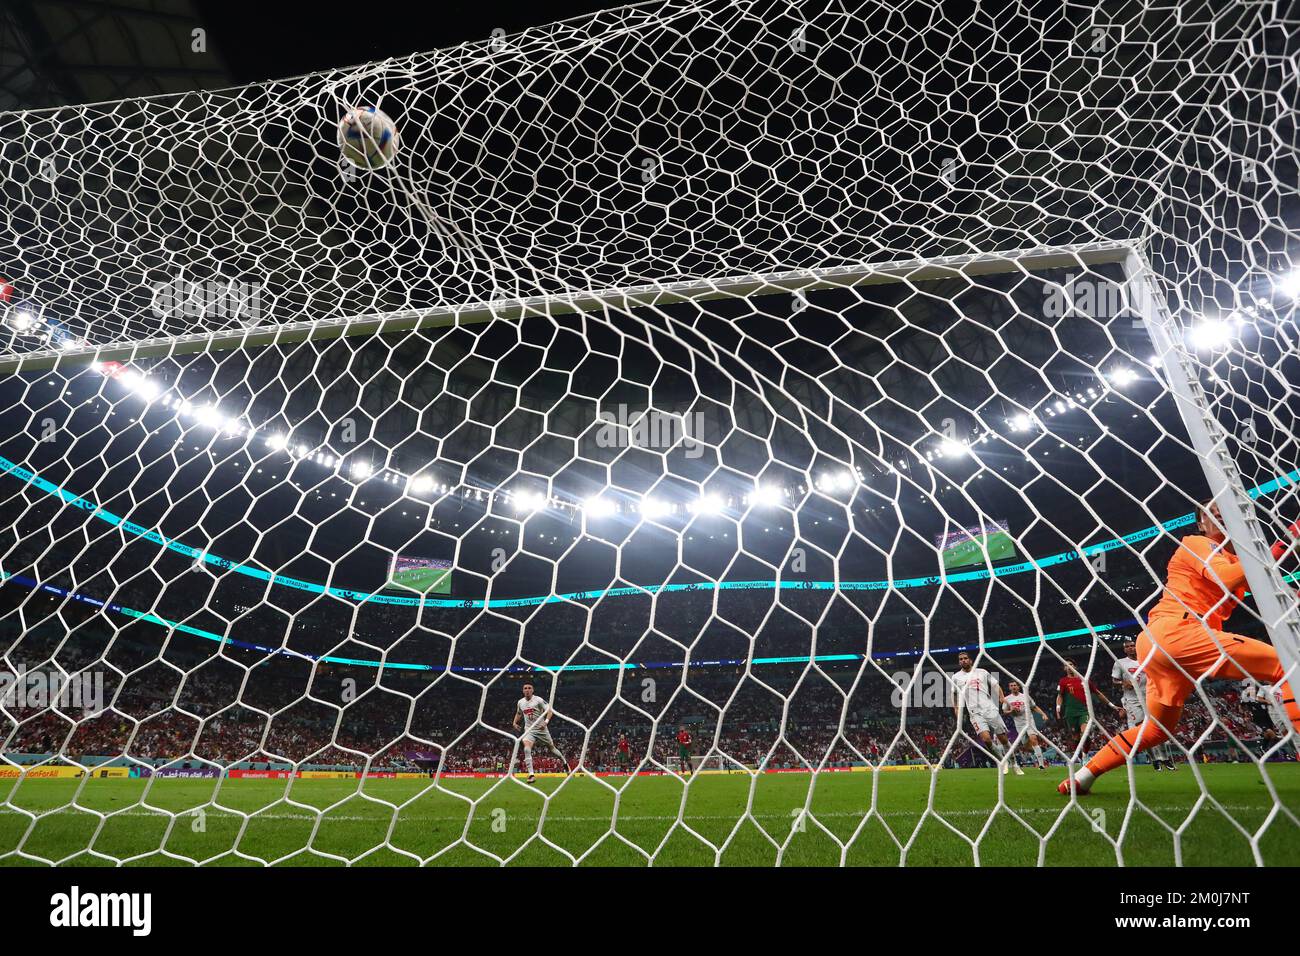 Lusail, Qatar. 06th Dec, 2022. Soccer, World Cup 2022 in Qatar, Portugal - Switzerland, Round of 16, at Lusail Stadium, Portugal's Goncalo Ramos scores his opening goal against goalkeeper Yann Sommer of Switzerland to make it 1-0. Credit: Tom Weller/dpa/Alamy Live News Stock Photo